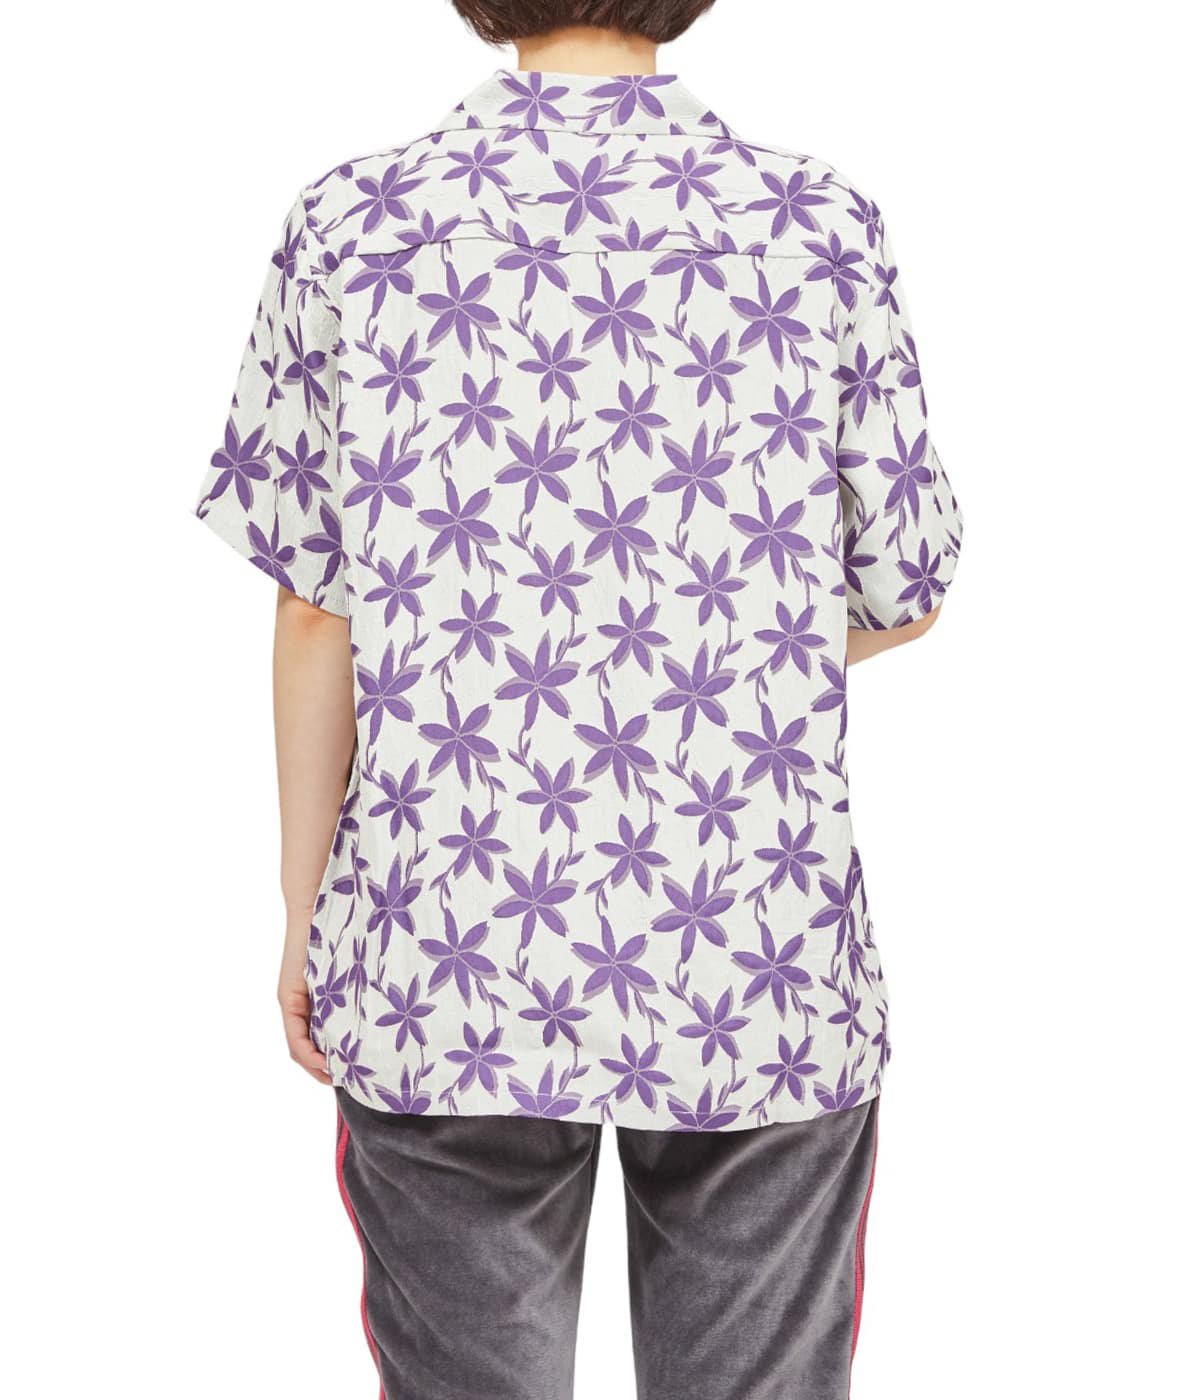 S/S One-Up Shirt - ACE/R Floral Jq. | NEEDLES(ニードルズ 